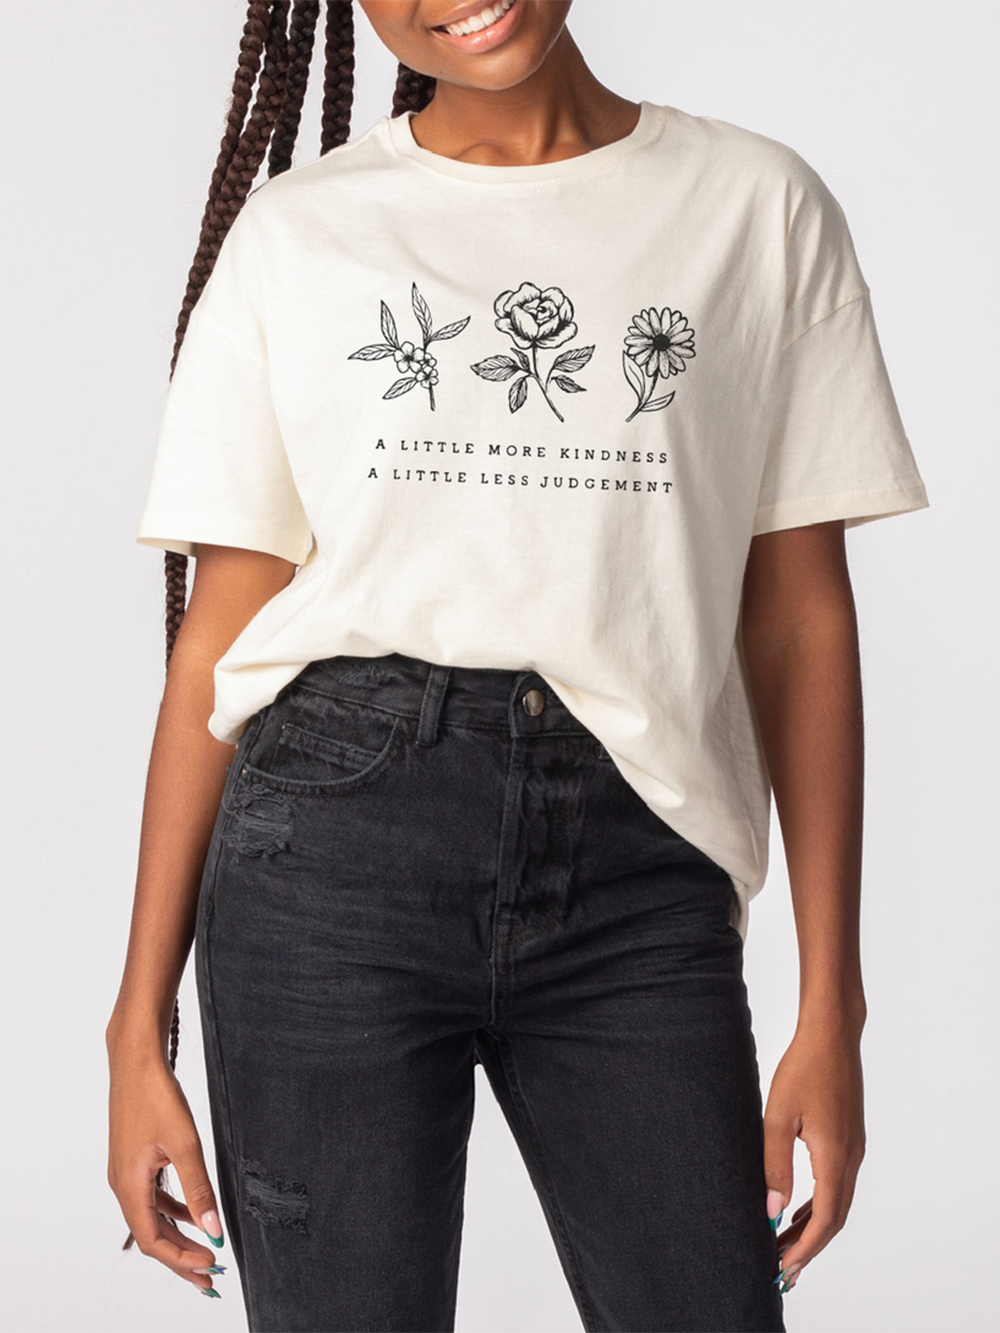 Birth Flower A Little More Kindness Oversized Tee